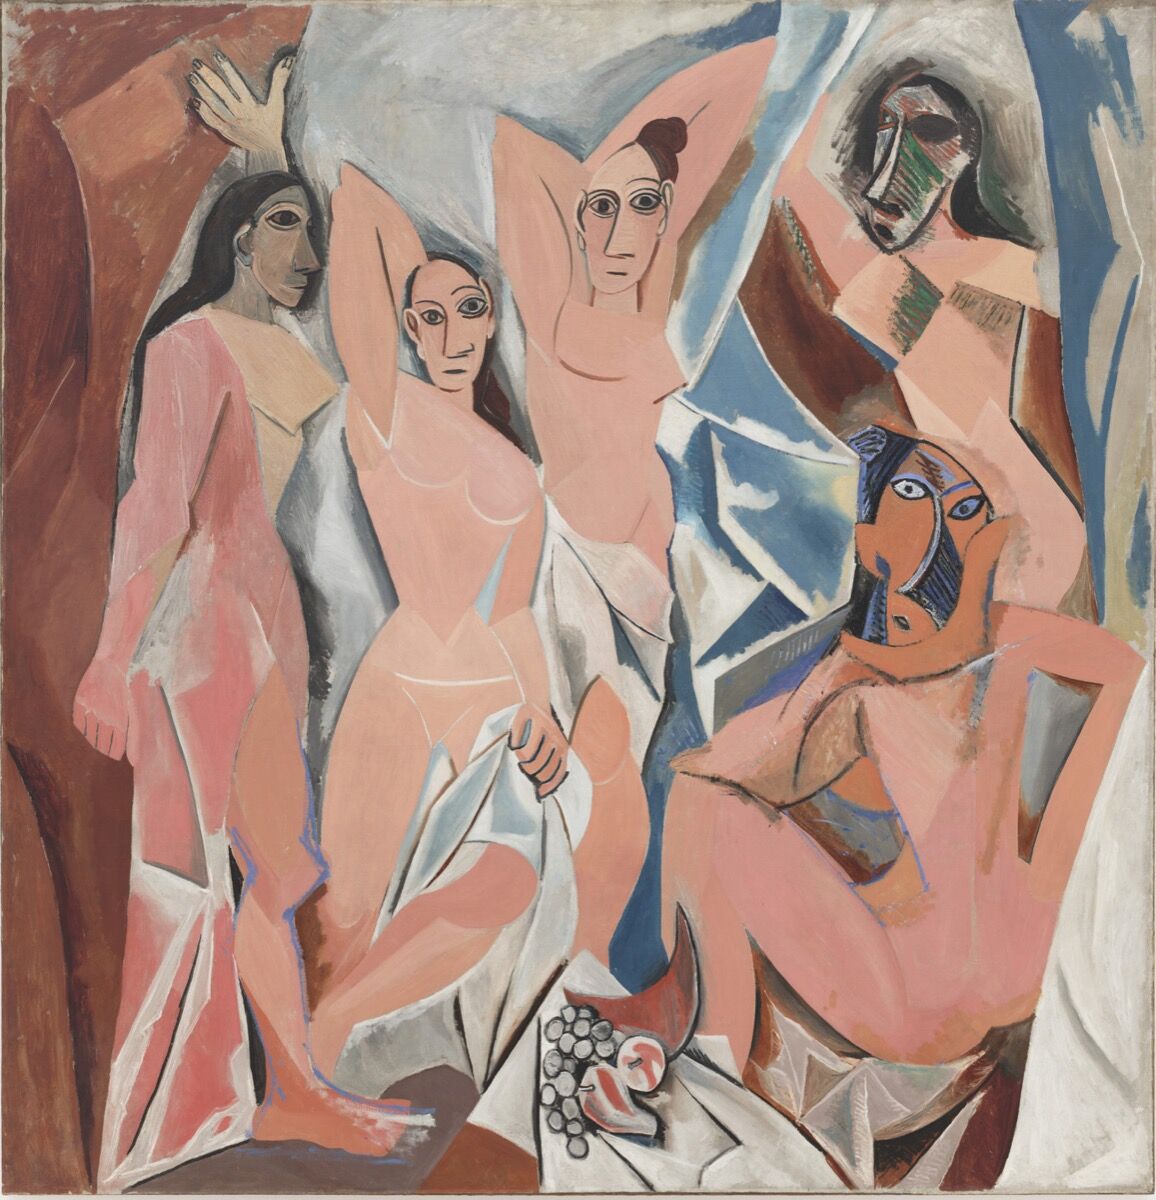 Pablo Picasso.  Les Demoiselles d’Avignon . 1907. © 2004 Estate of Pablo Picasso / Artists Rights Society (ARS), New York. Courtesy of the Museum of Modern Art.